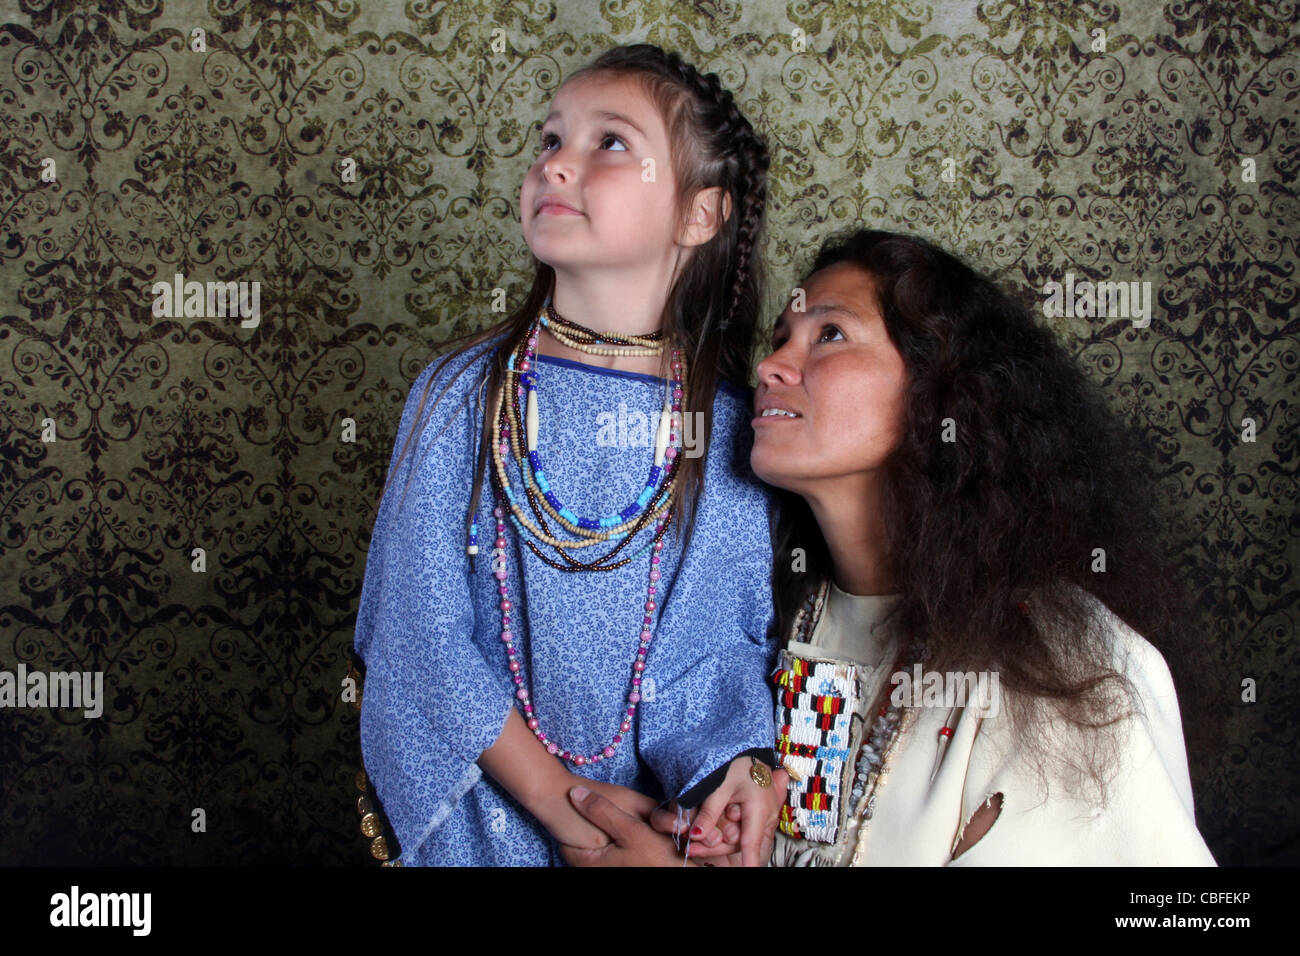 Native American Lakota Sioux Indian woman and child looking up Stock Photo